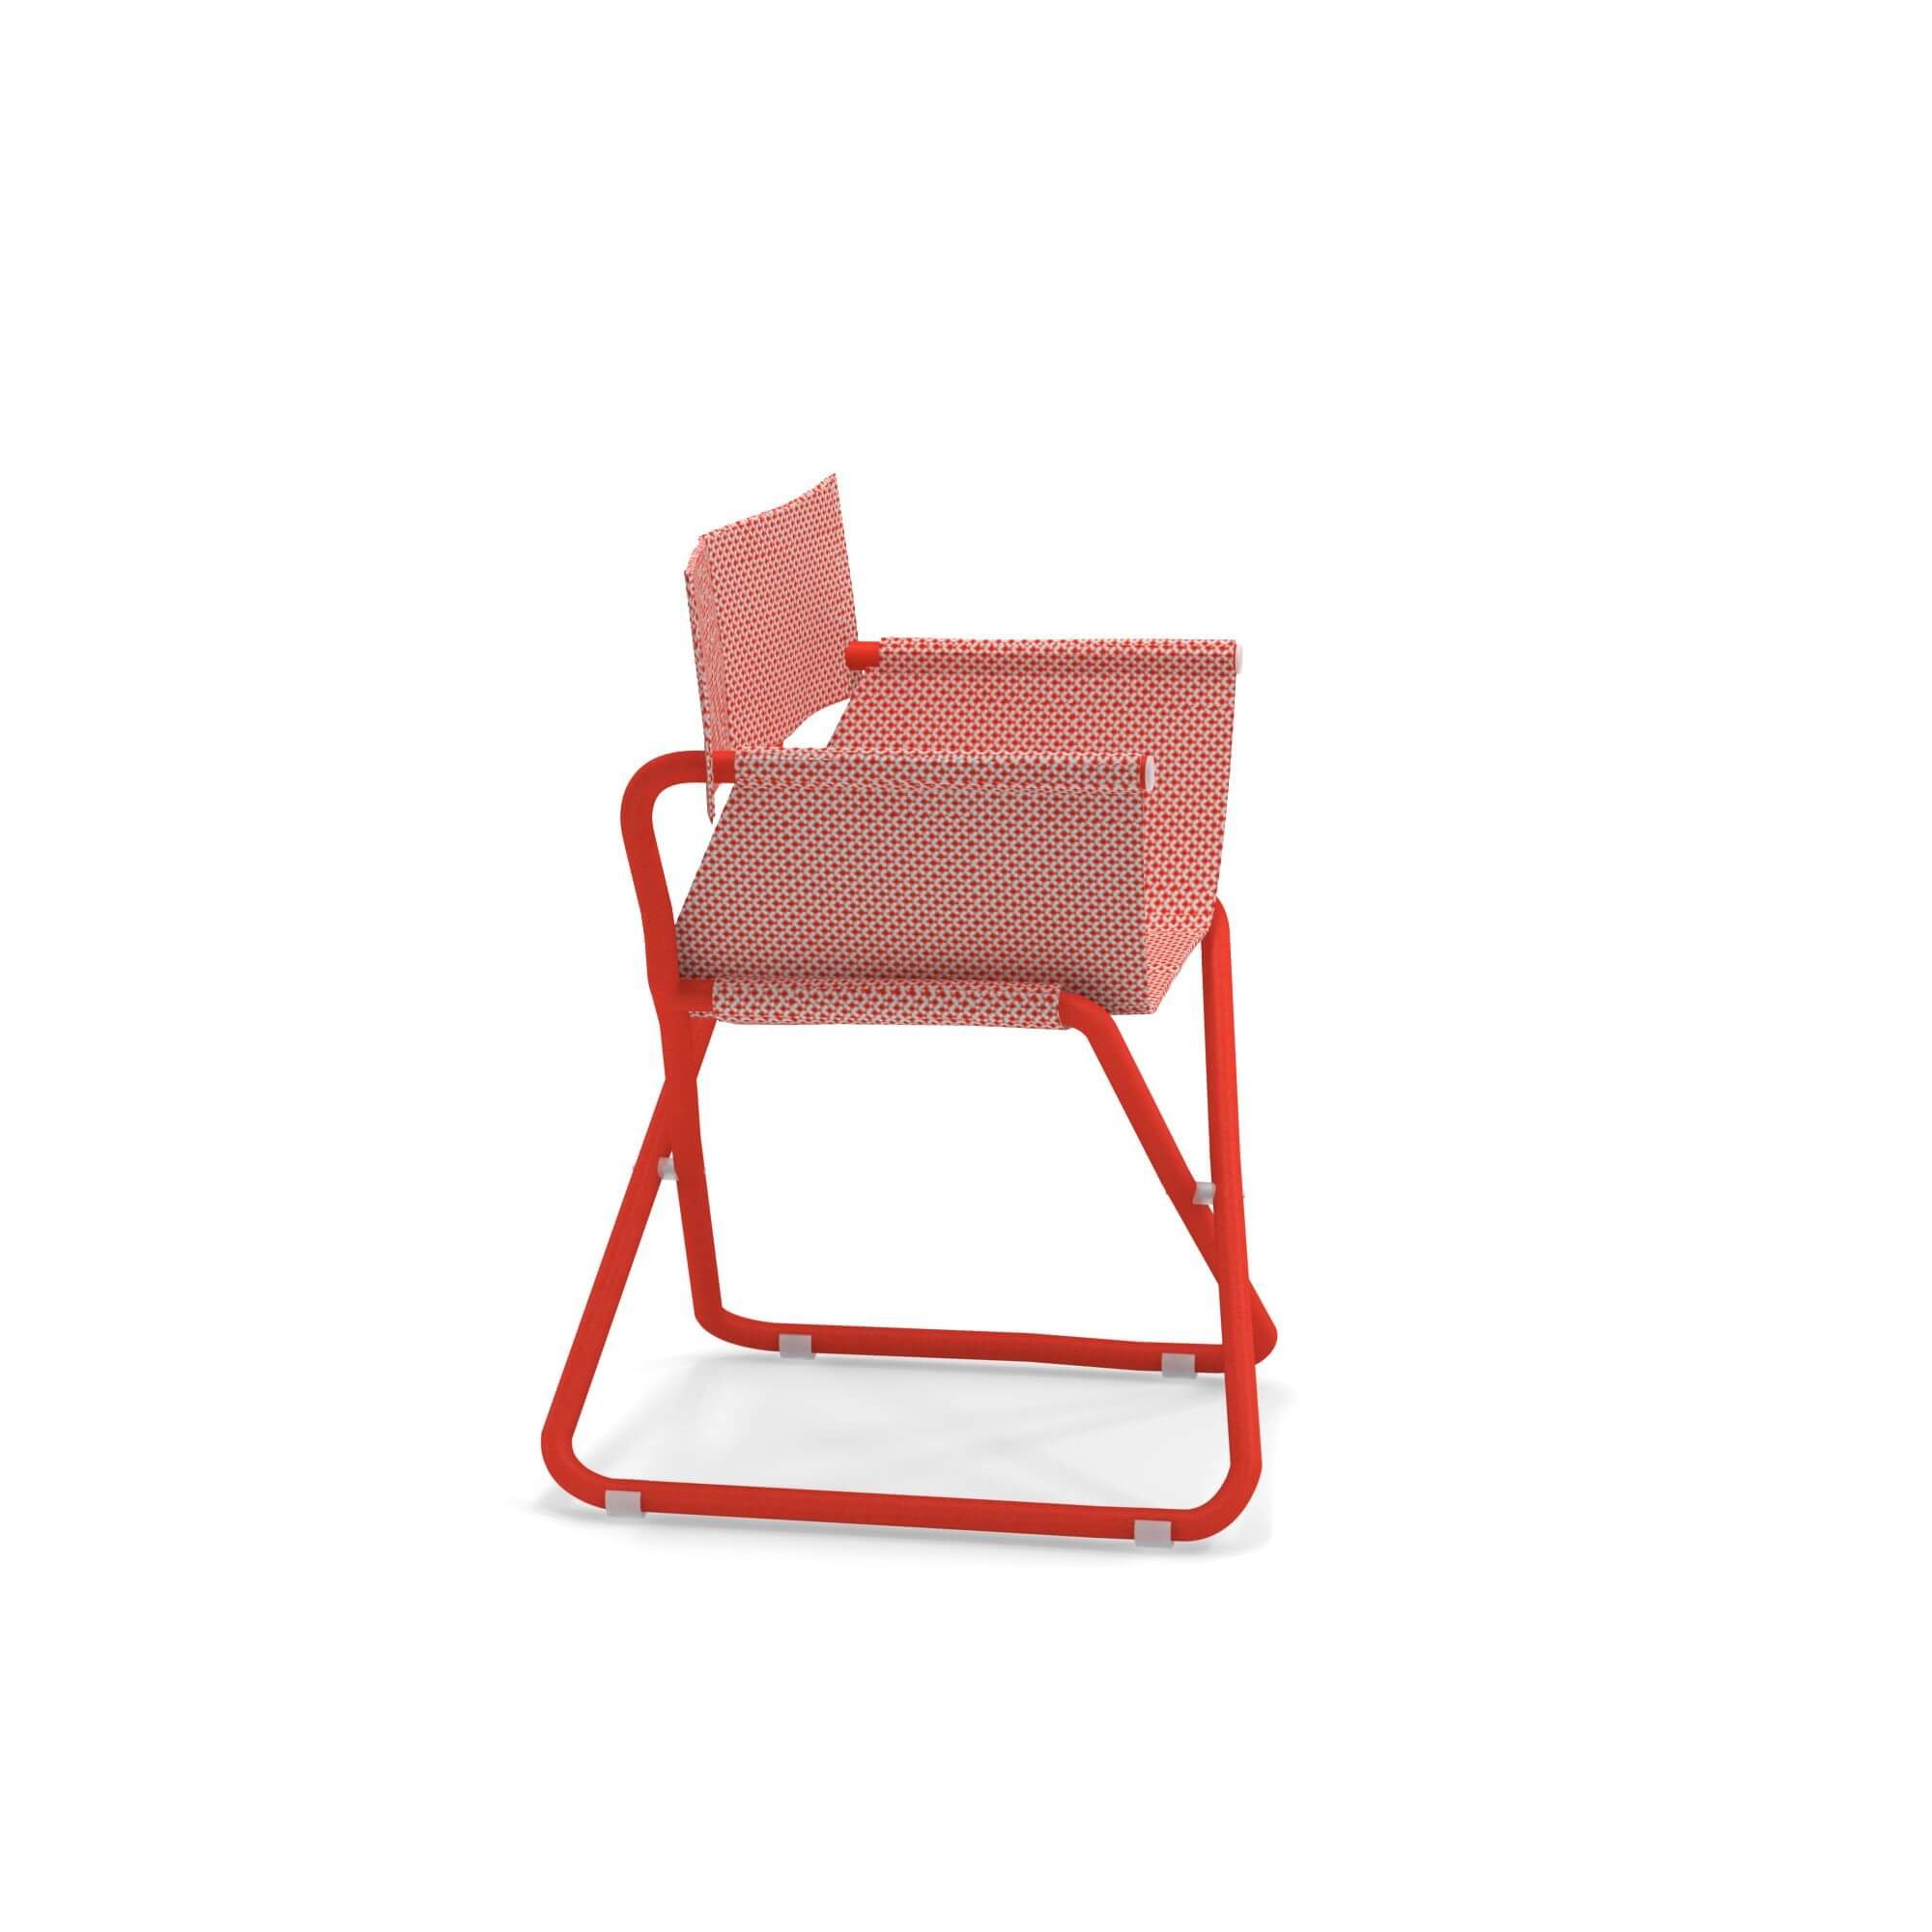 Snooze Director's Chair lounge from Emu, designed by Chiaramonte and Marin